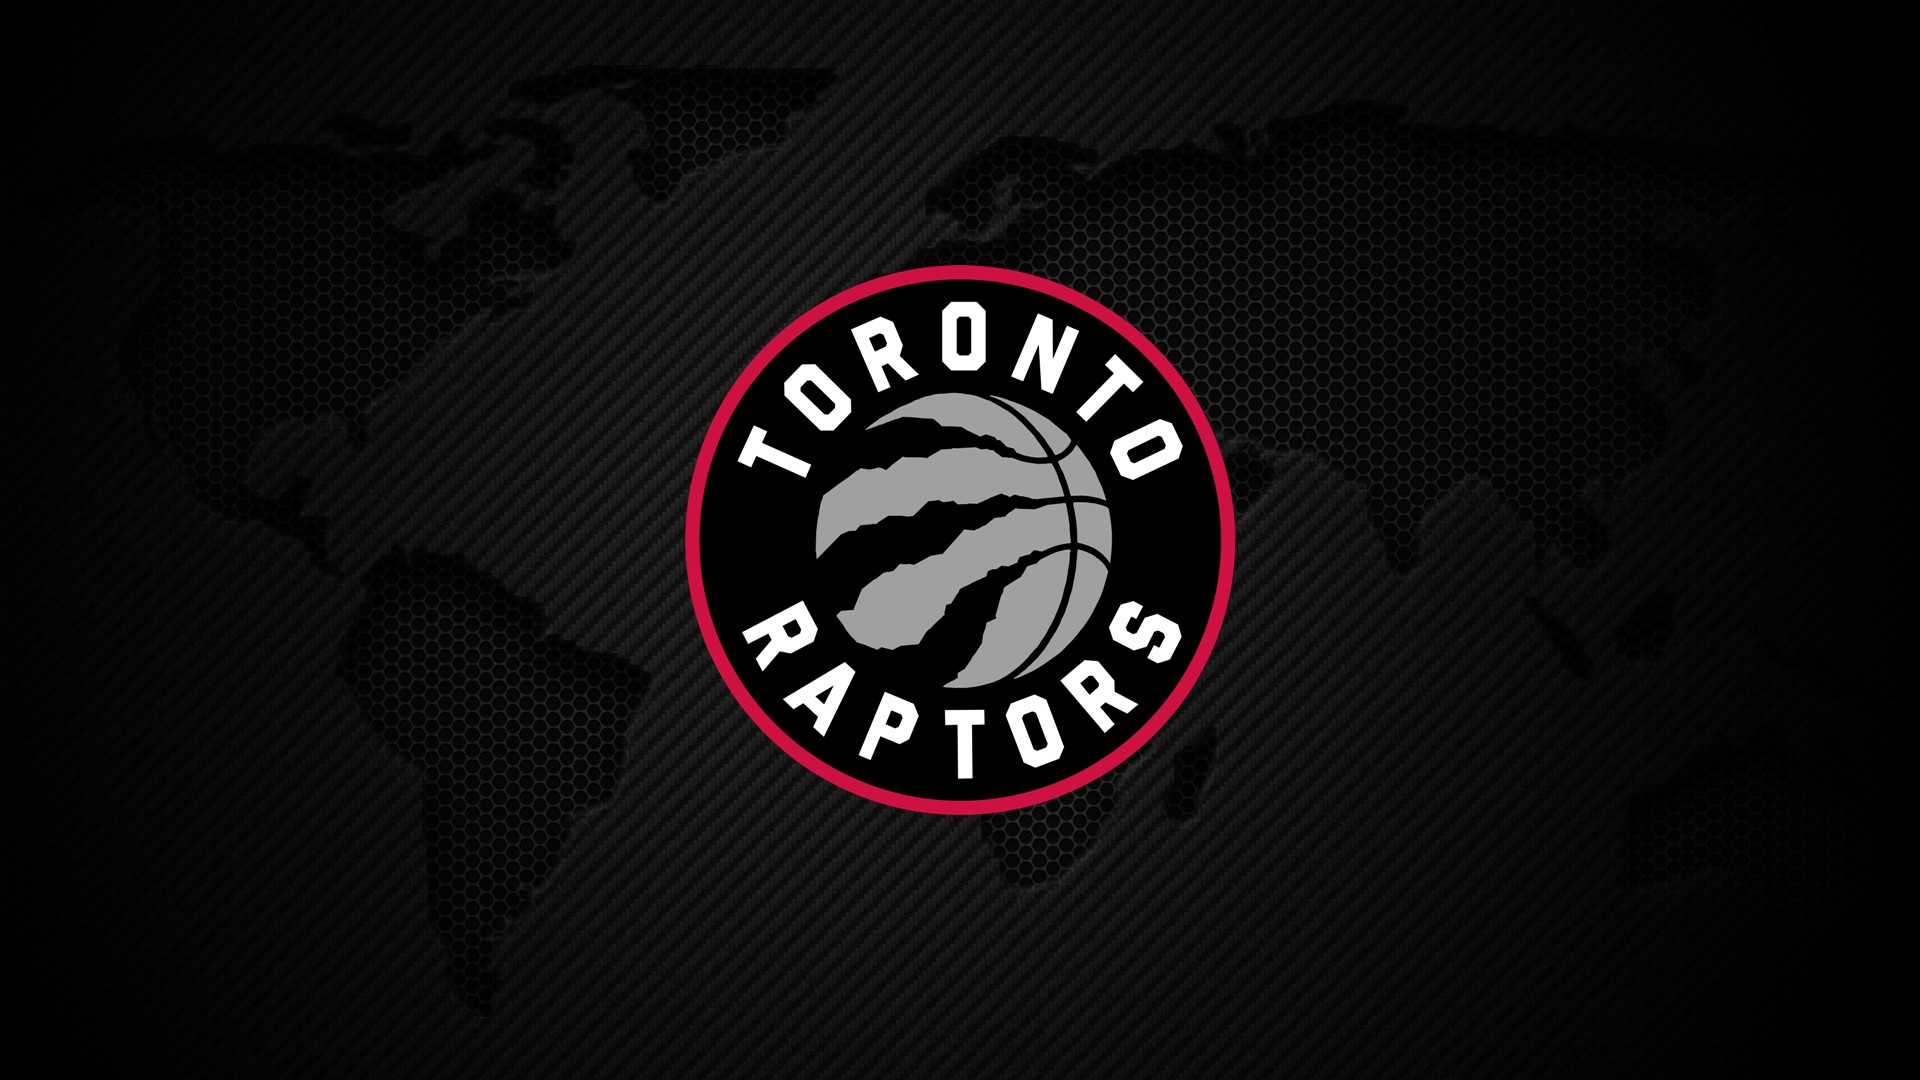 HD Backgrounds NBA Raptors with image dimensions 1920x1080 pixel. You can make this wallpaper for your Desktop Computer Backgrounds, Windows or Mac Screensavers, iPhone Lock screen, Tablet or Android and another Mobile Phone device